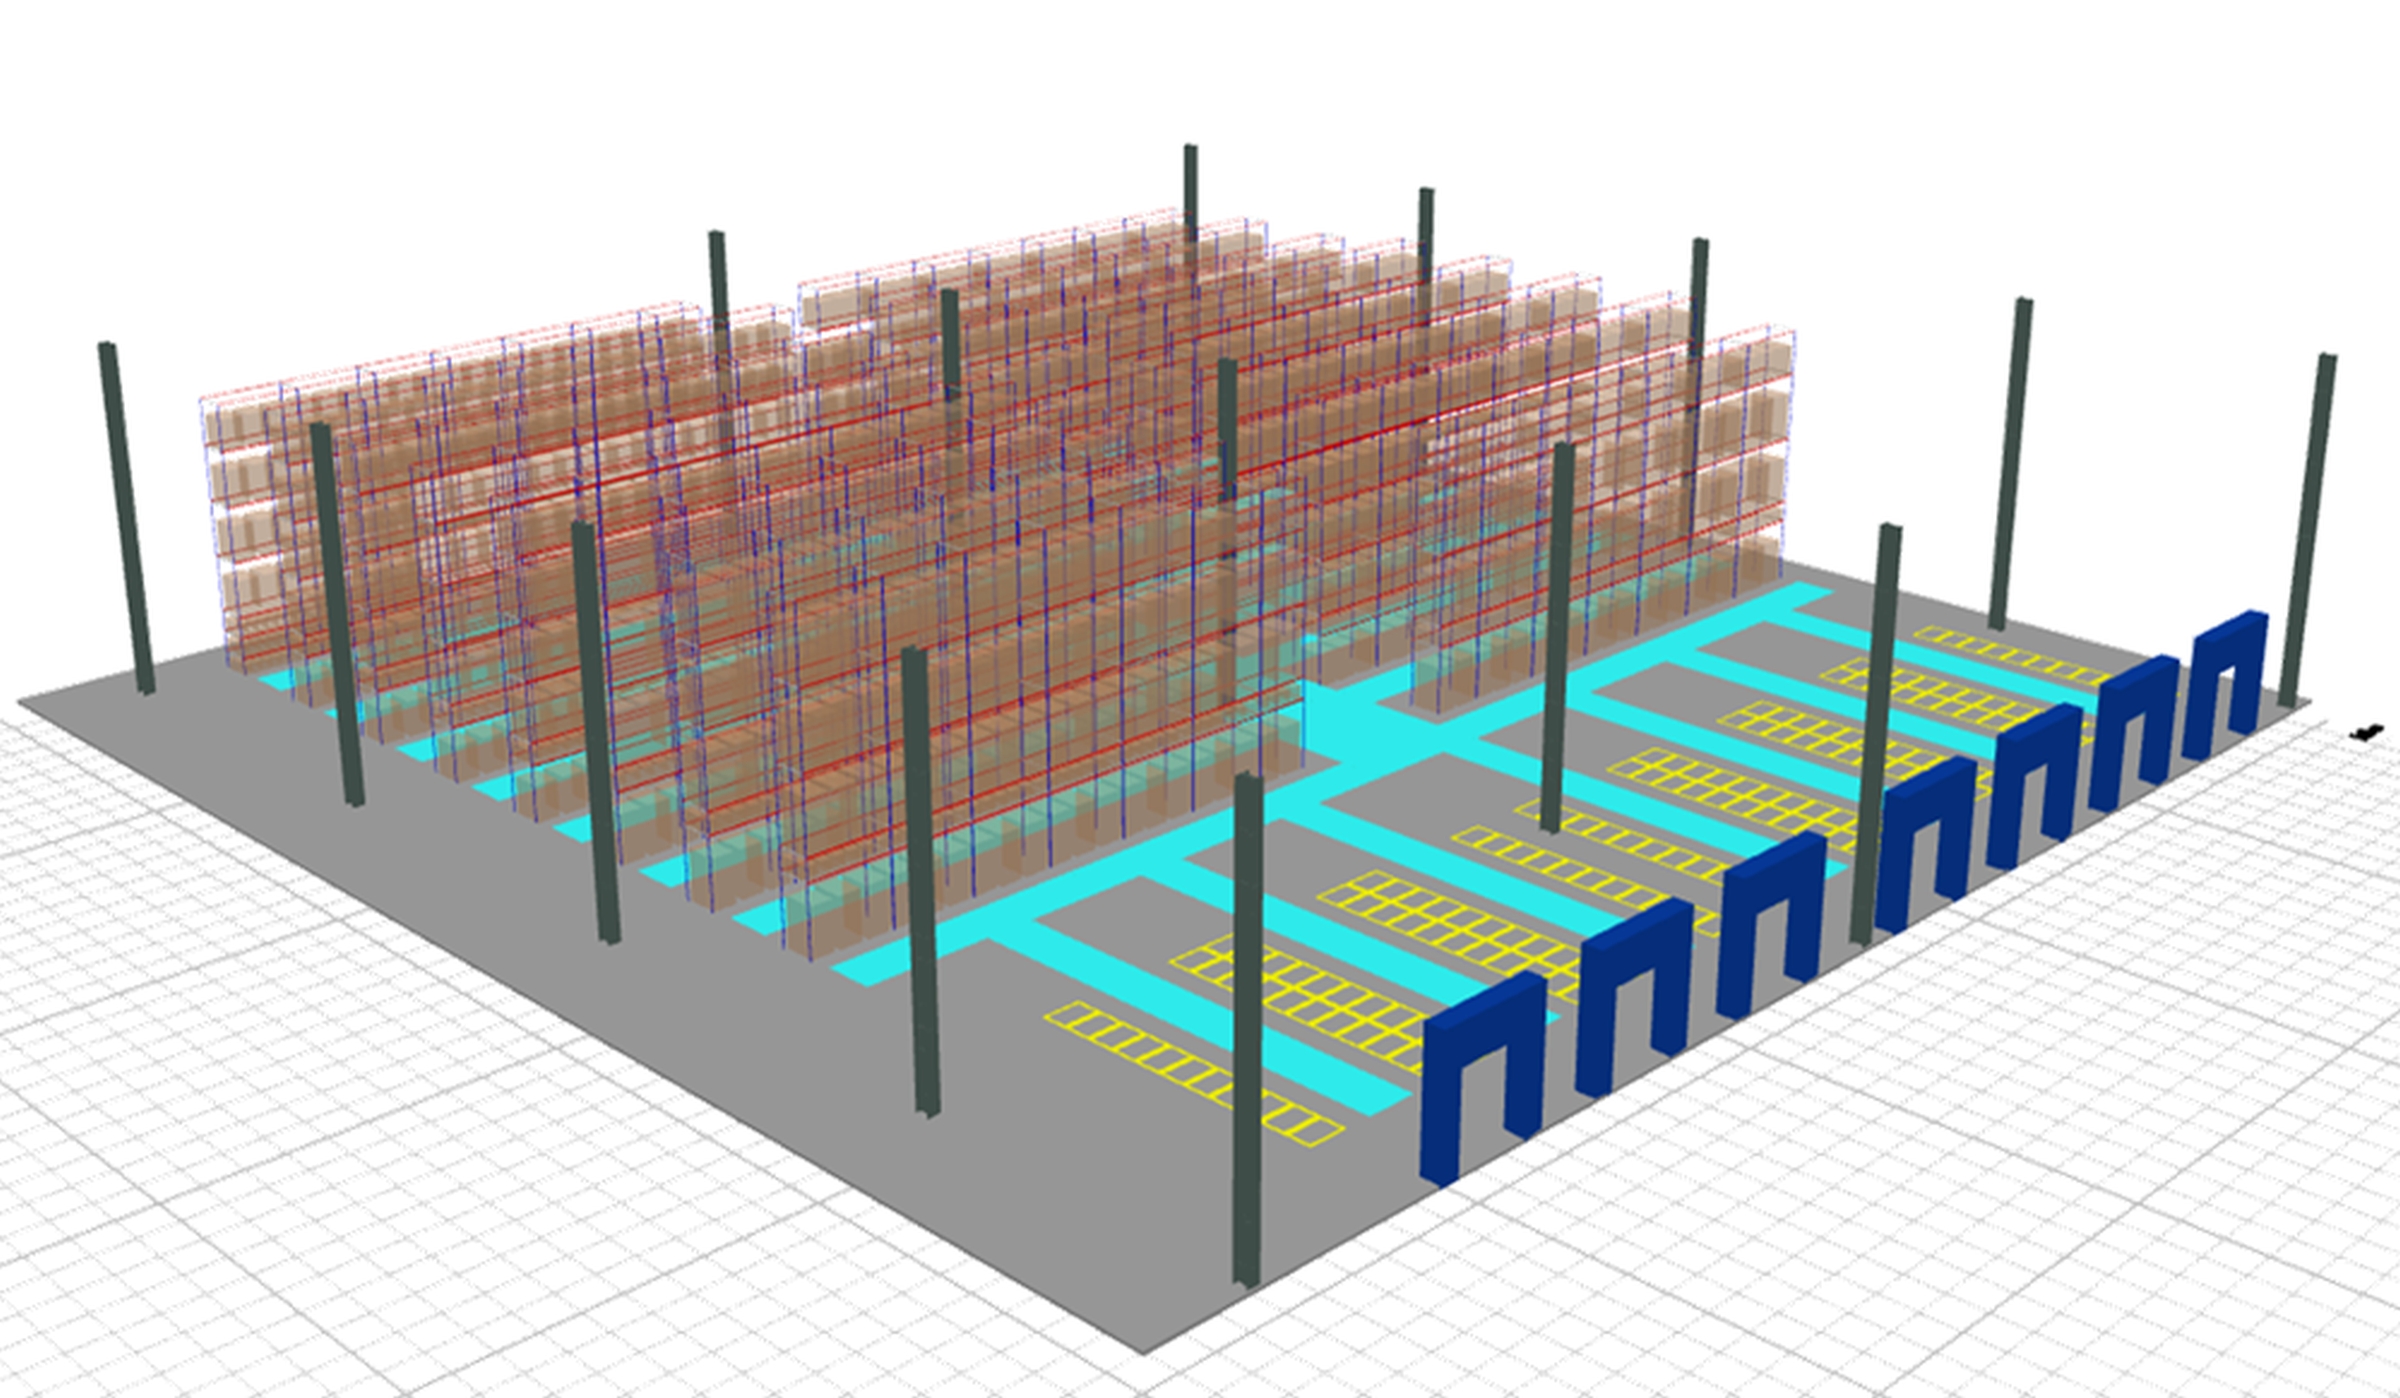 Visualization of the project in the SIMMAG3D system. Square warehouse space. Gray floor with blue access paths and passages between shelves. Visible diagrams of entrances (navy blue), multi-storey shelves (red-brown-navy blue constructions) and supports (bronze)